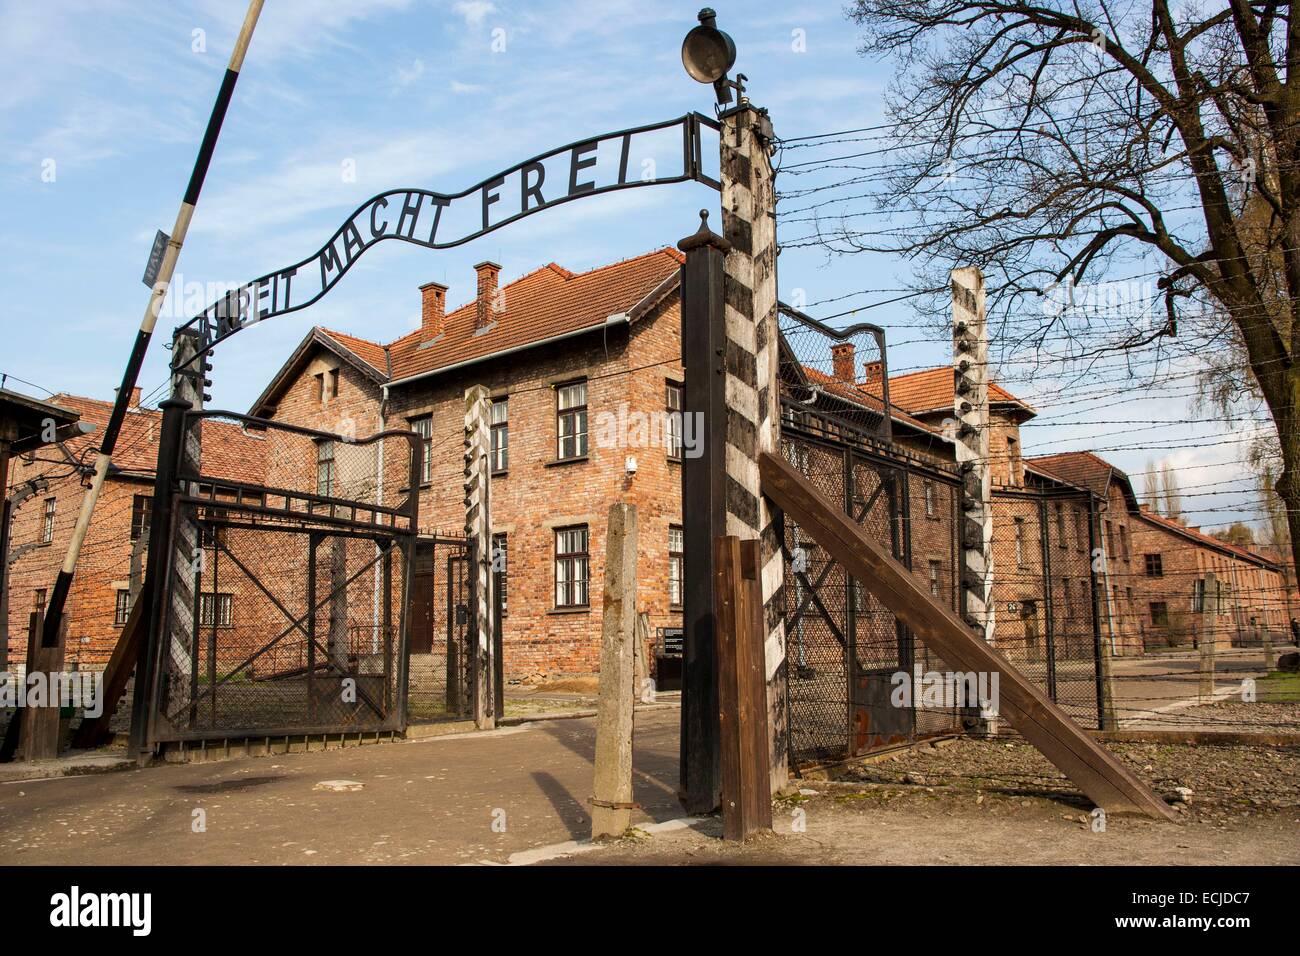 Poland, Lesser Poland, Oswiecim village, Auschwitz Birkenau, German Nazi Concentration and Extermination Camp (1940-1945), listed as World Heritage by UNESCO, the entry of the camp with the maxim Arbeit macht frei (work makes you free) Stock Photo